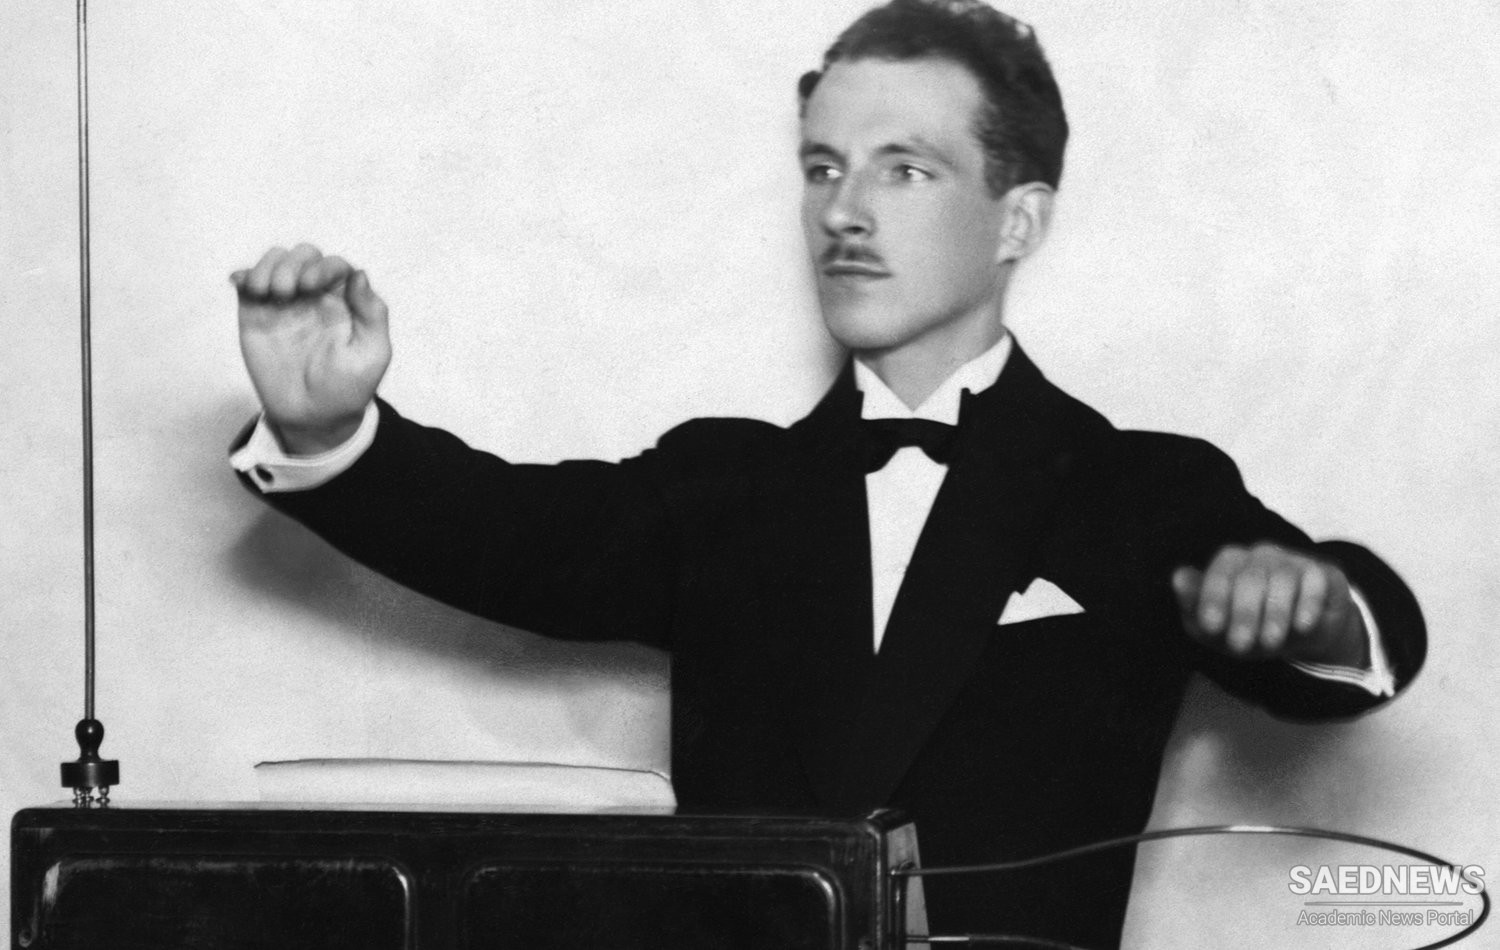 Solo of Theremin: How Physics Revolutionized the Musical Performance